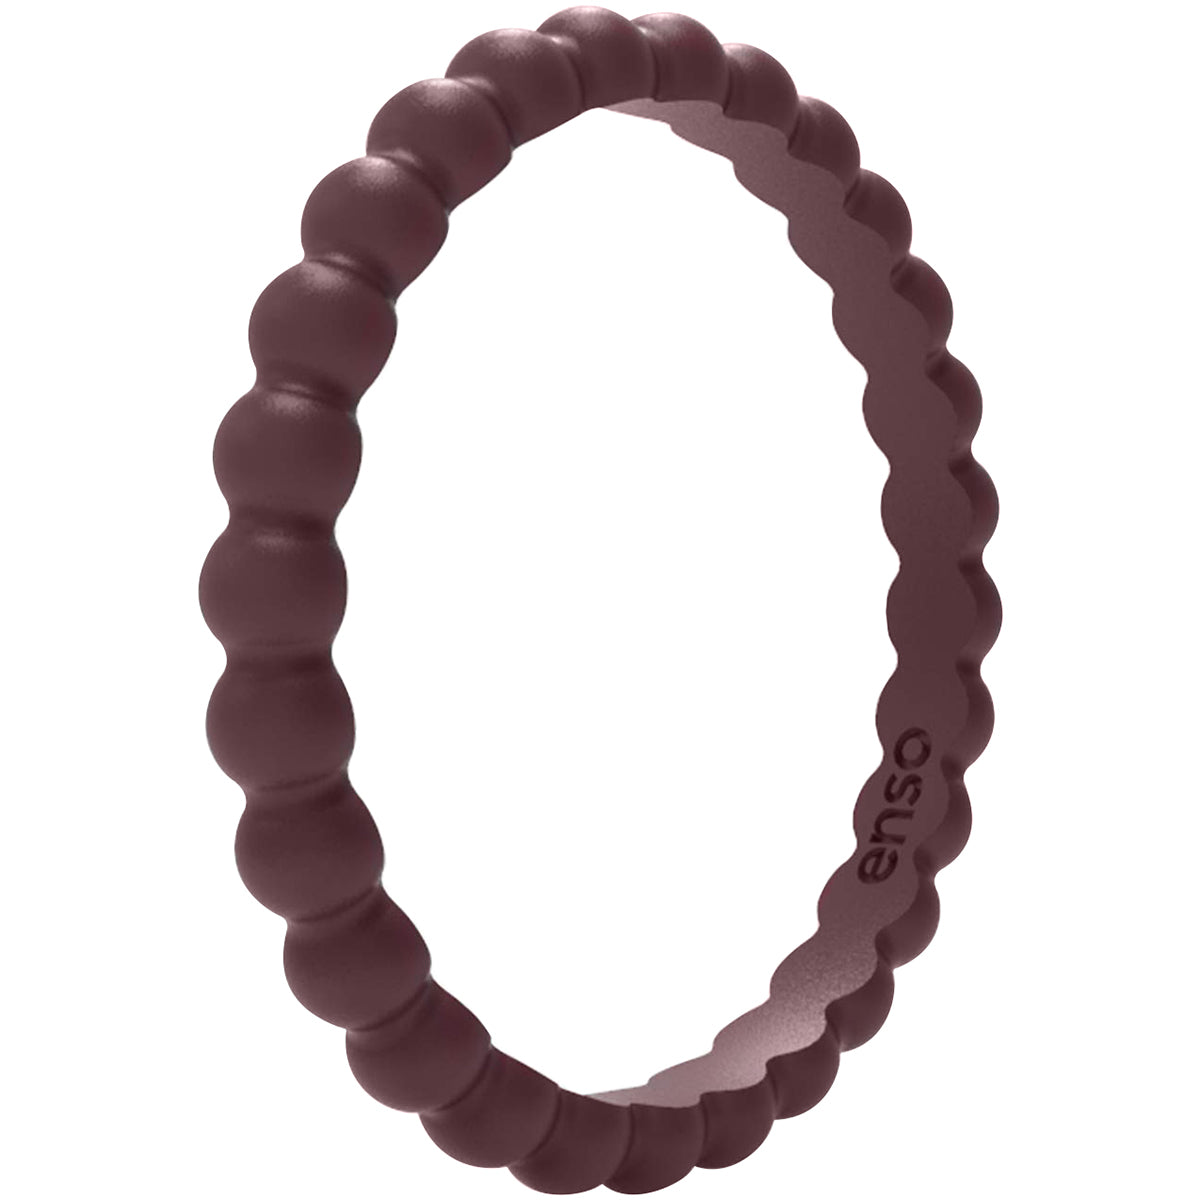 Enso Rings Beaded Stackables Silicone Ring Enso Rings